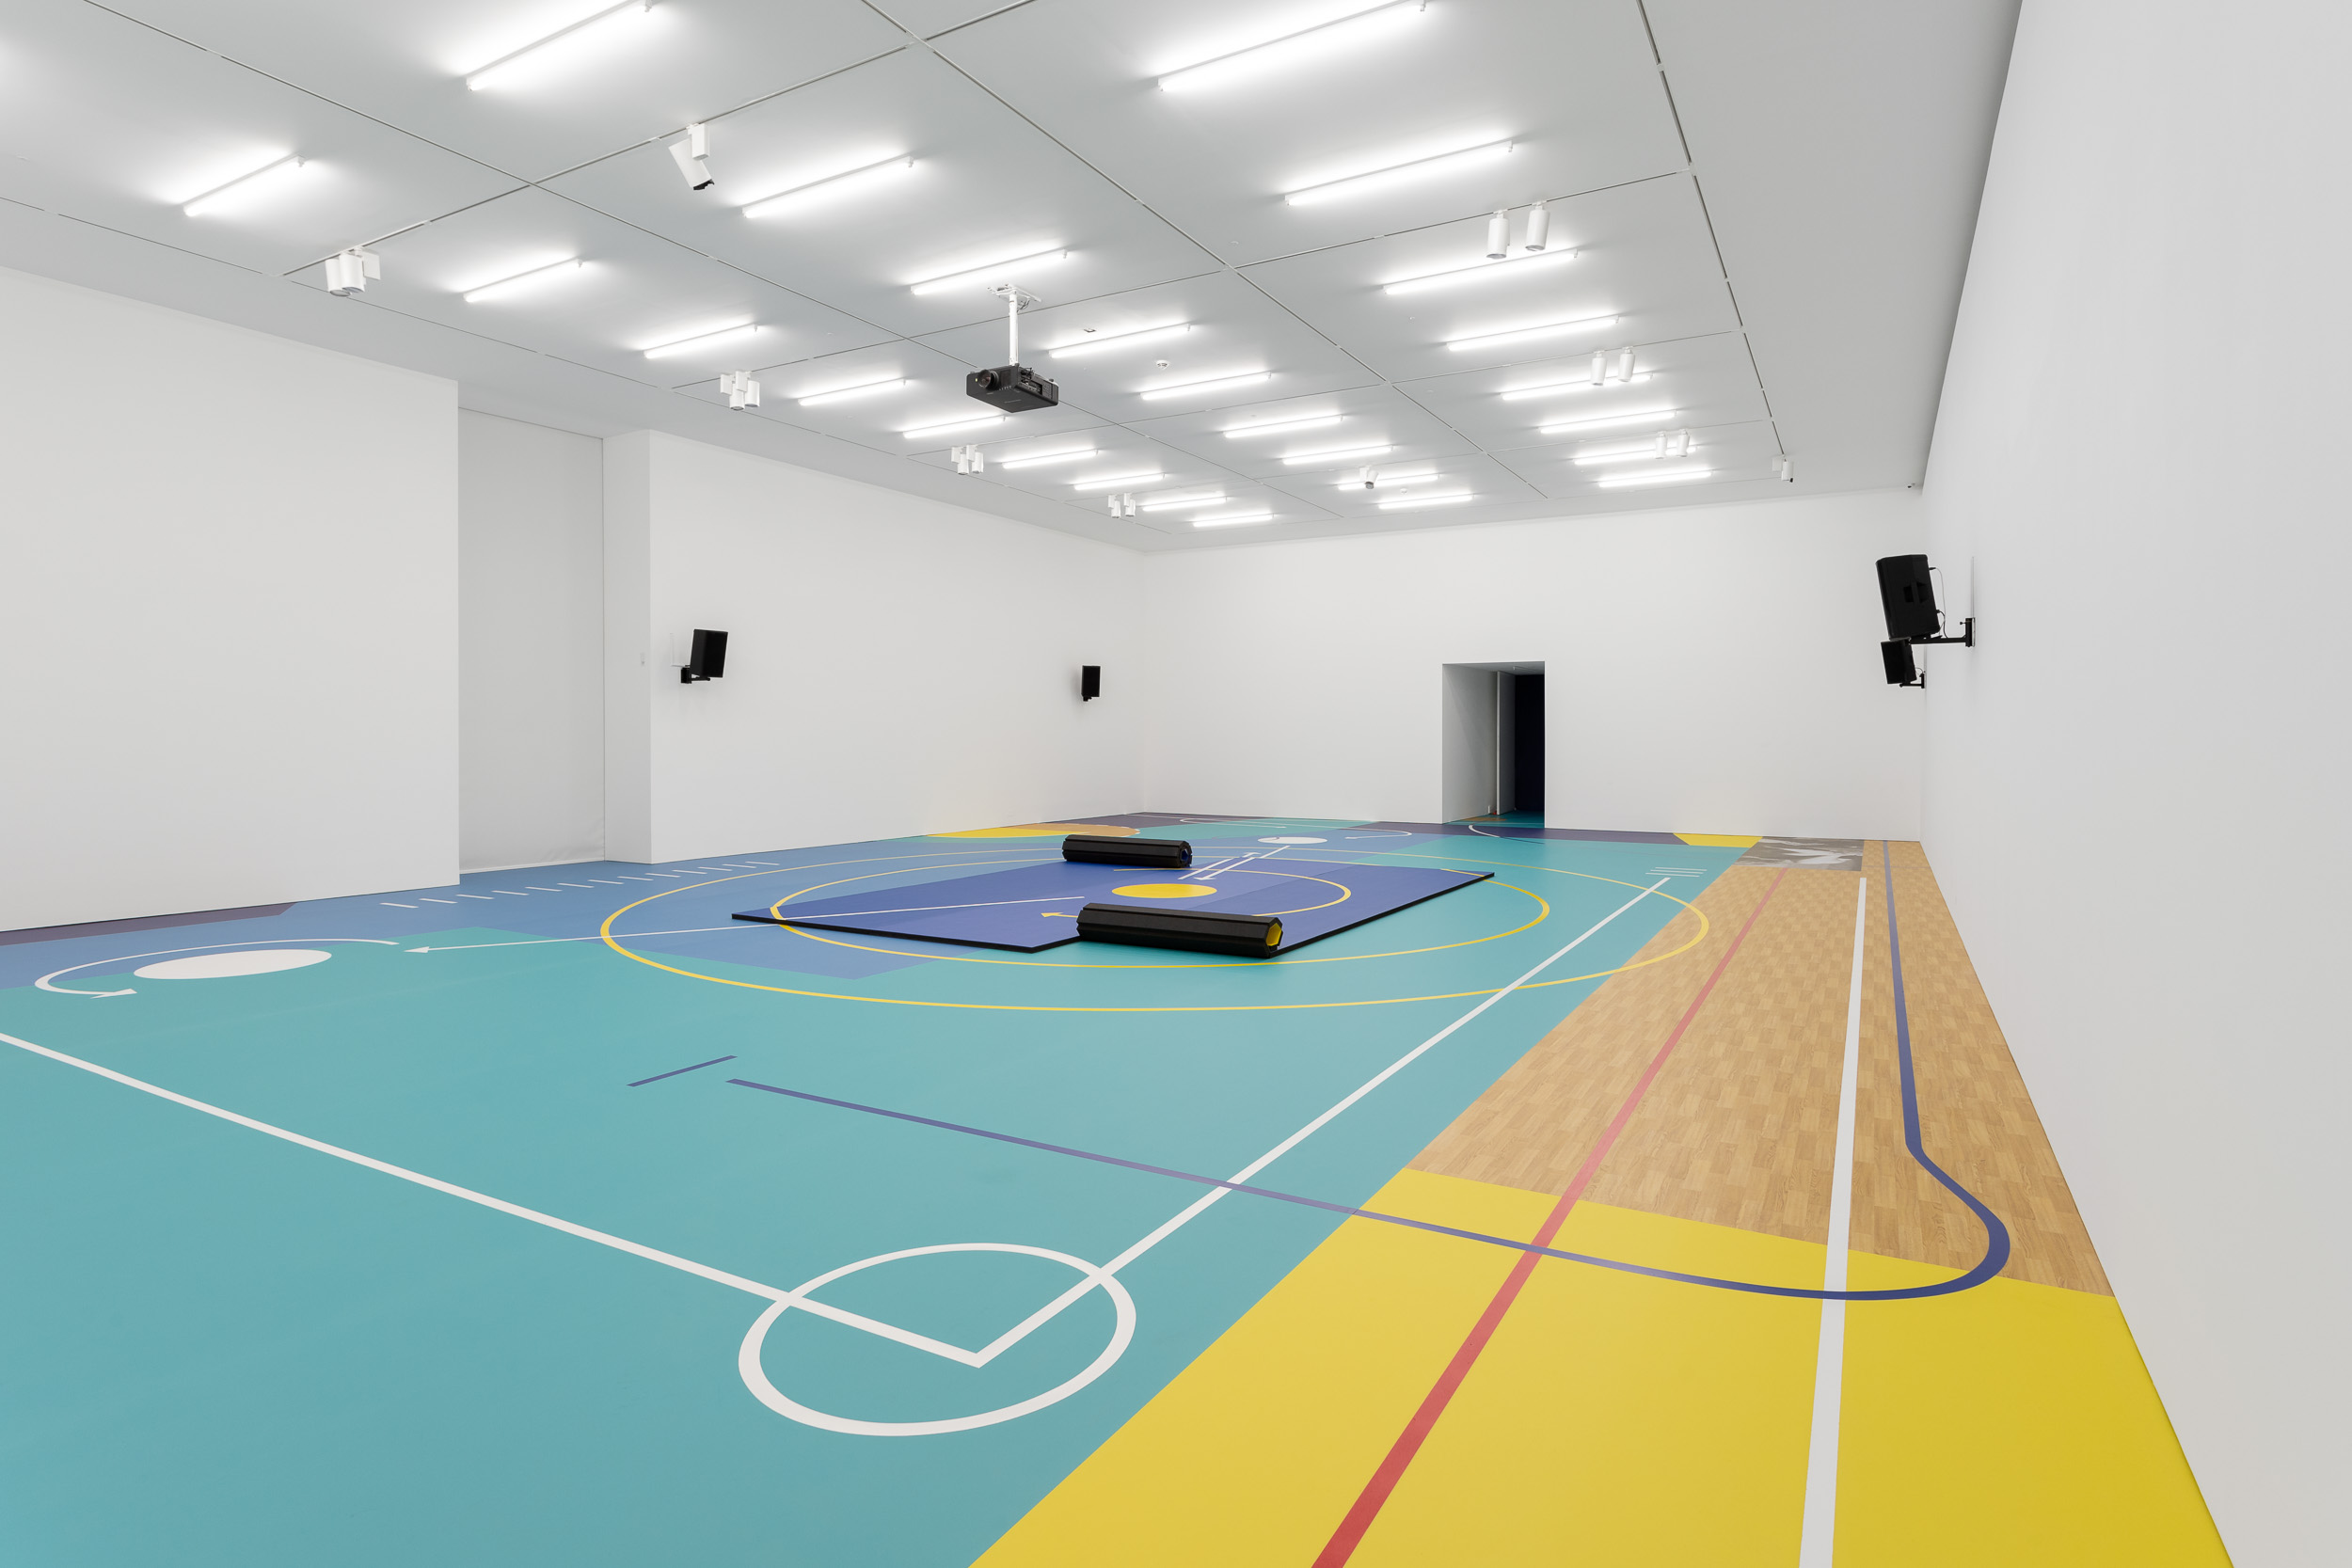 Points of Rupture Sports flooring